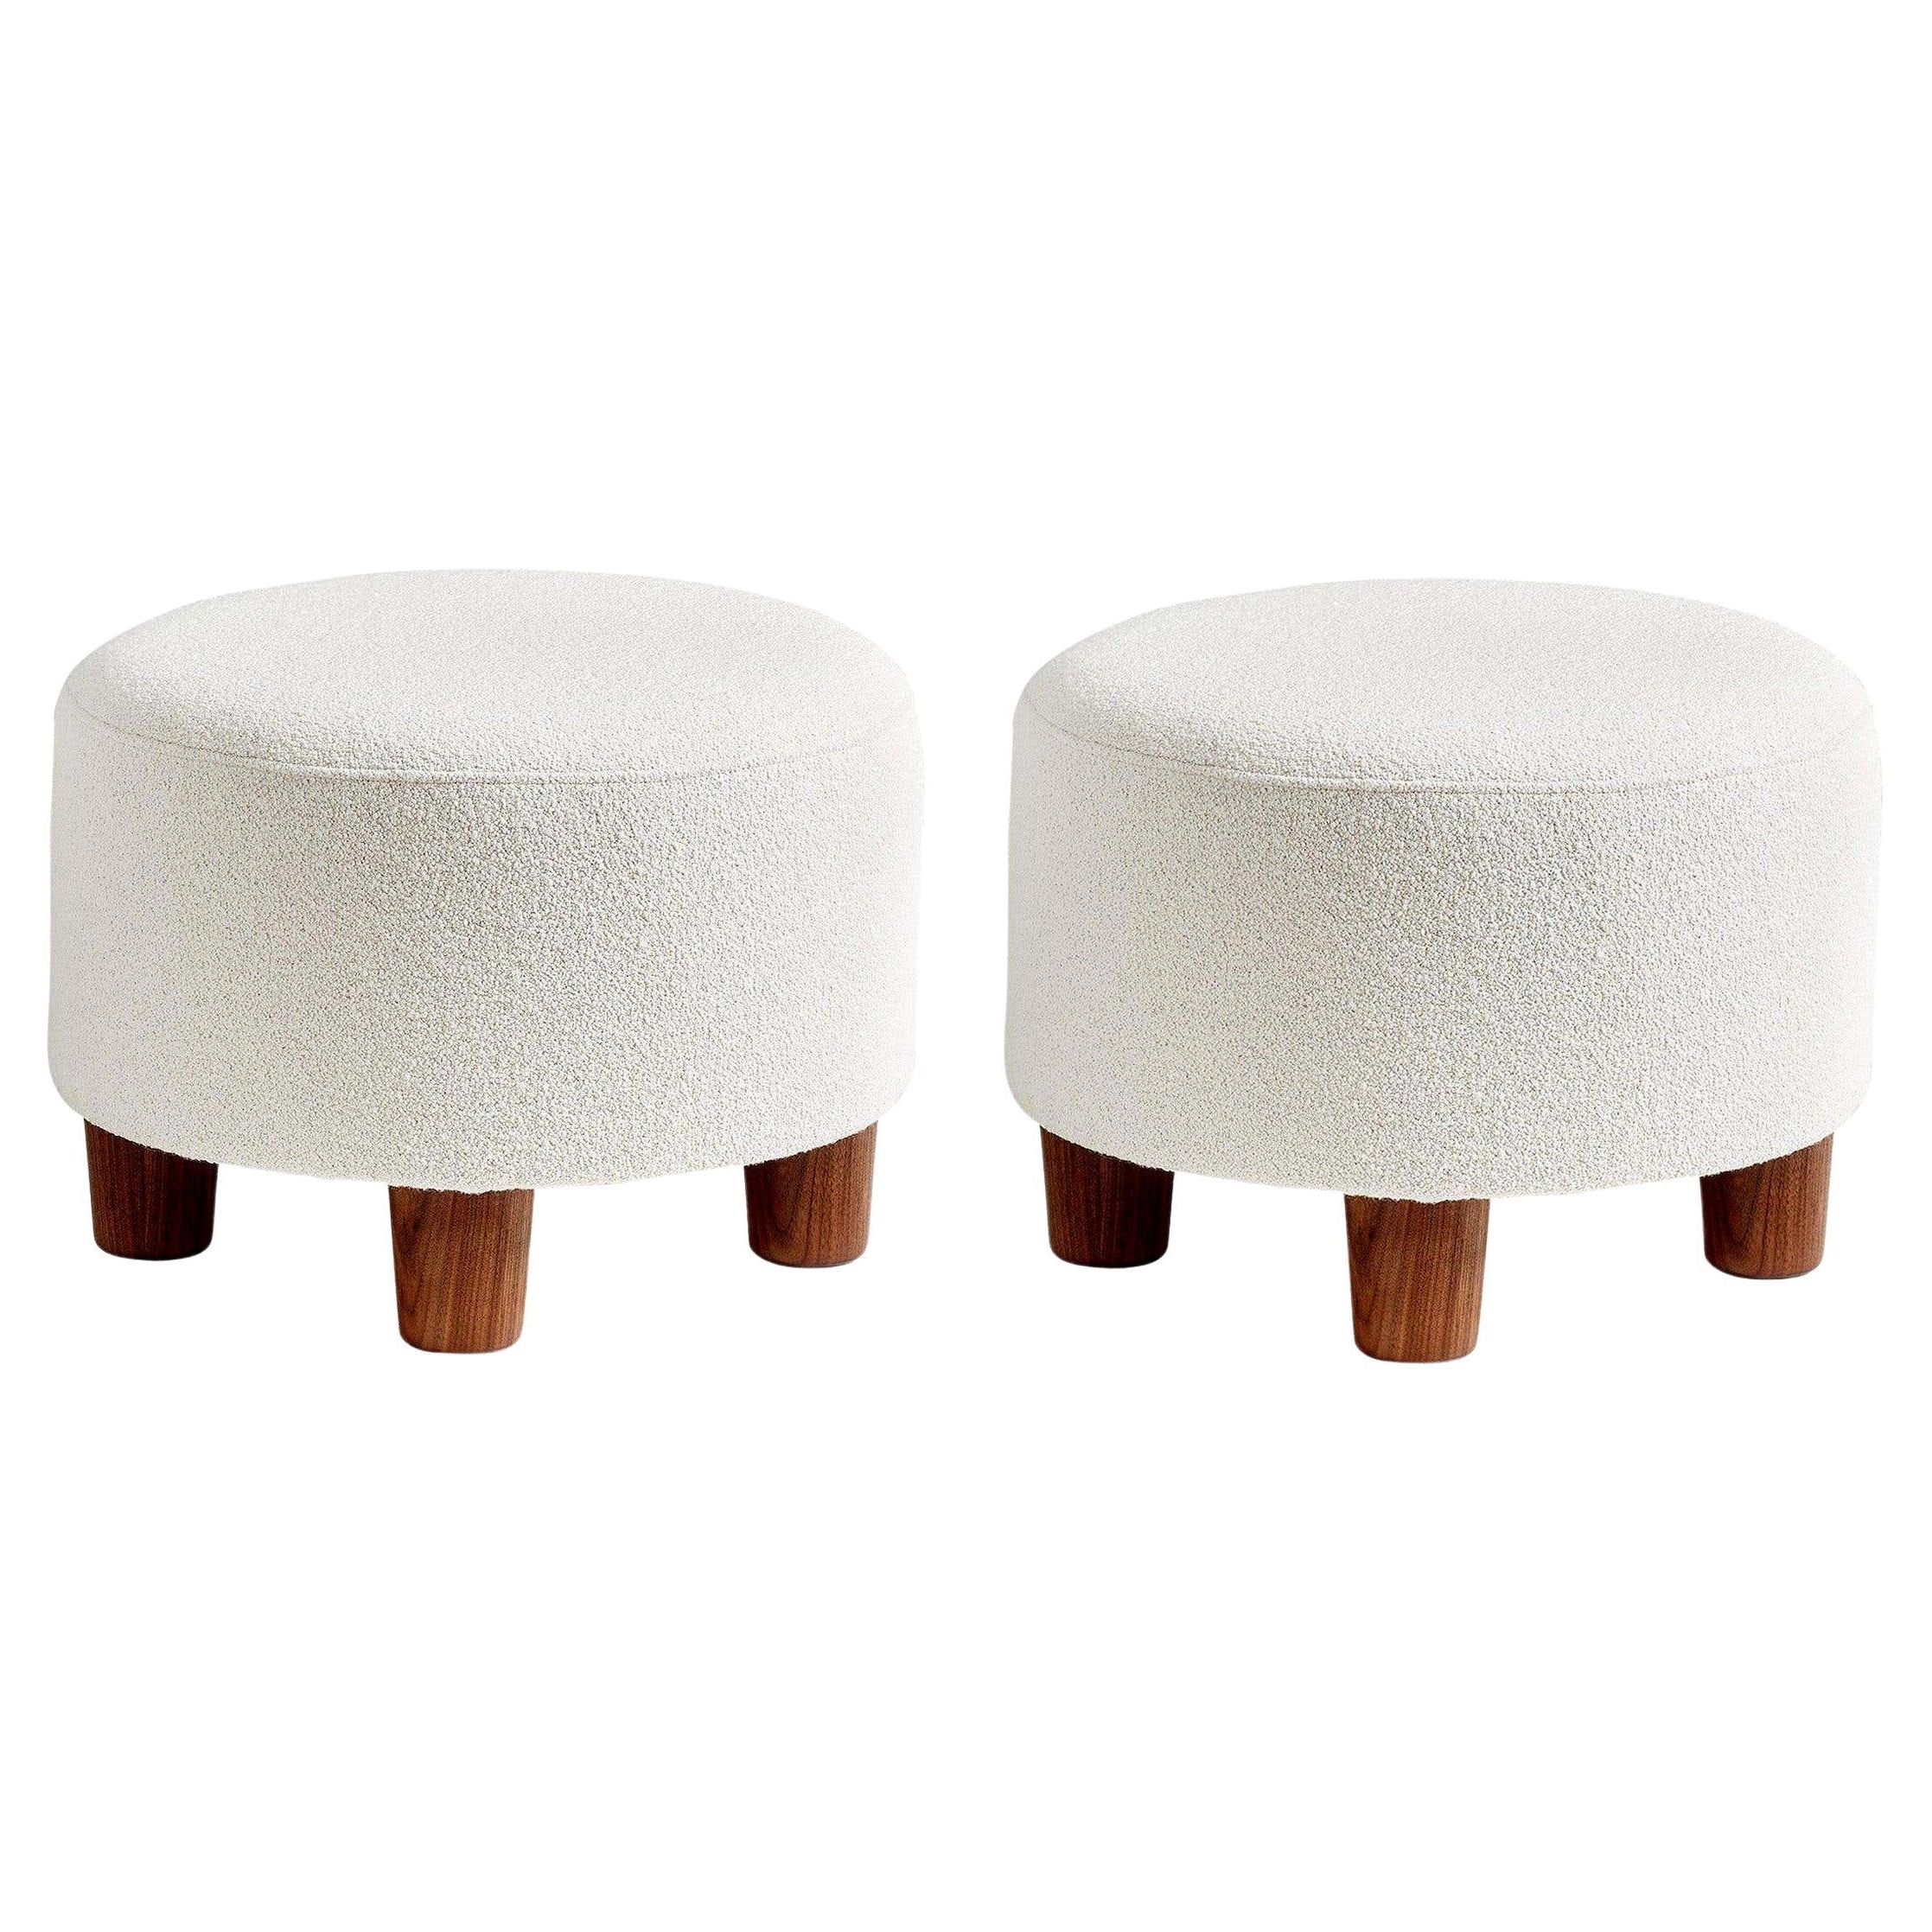 Latest Pair Of Custom Made Round Boucle Ottomans With Walnut Legs For Sale At  1stdibs Throughout Boucle Ottomans (View 8 of 15)